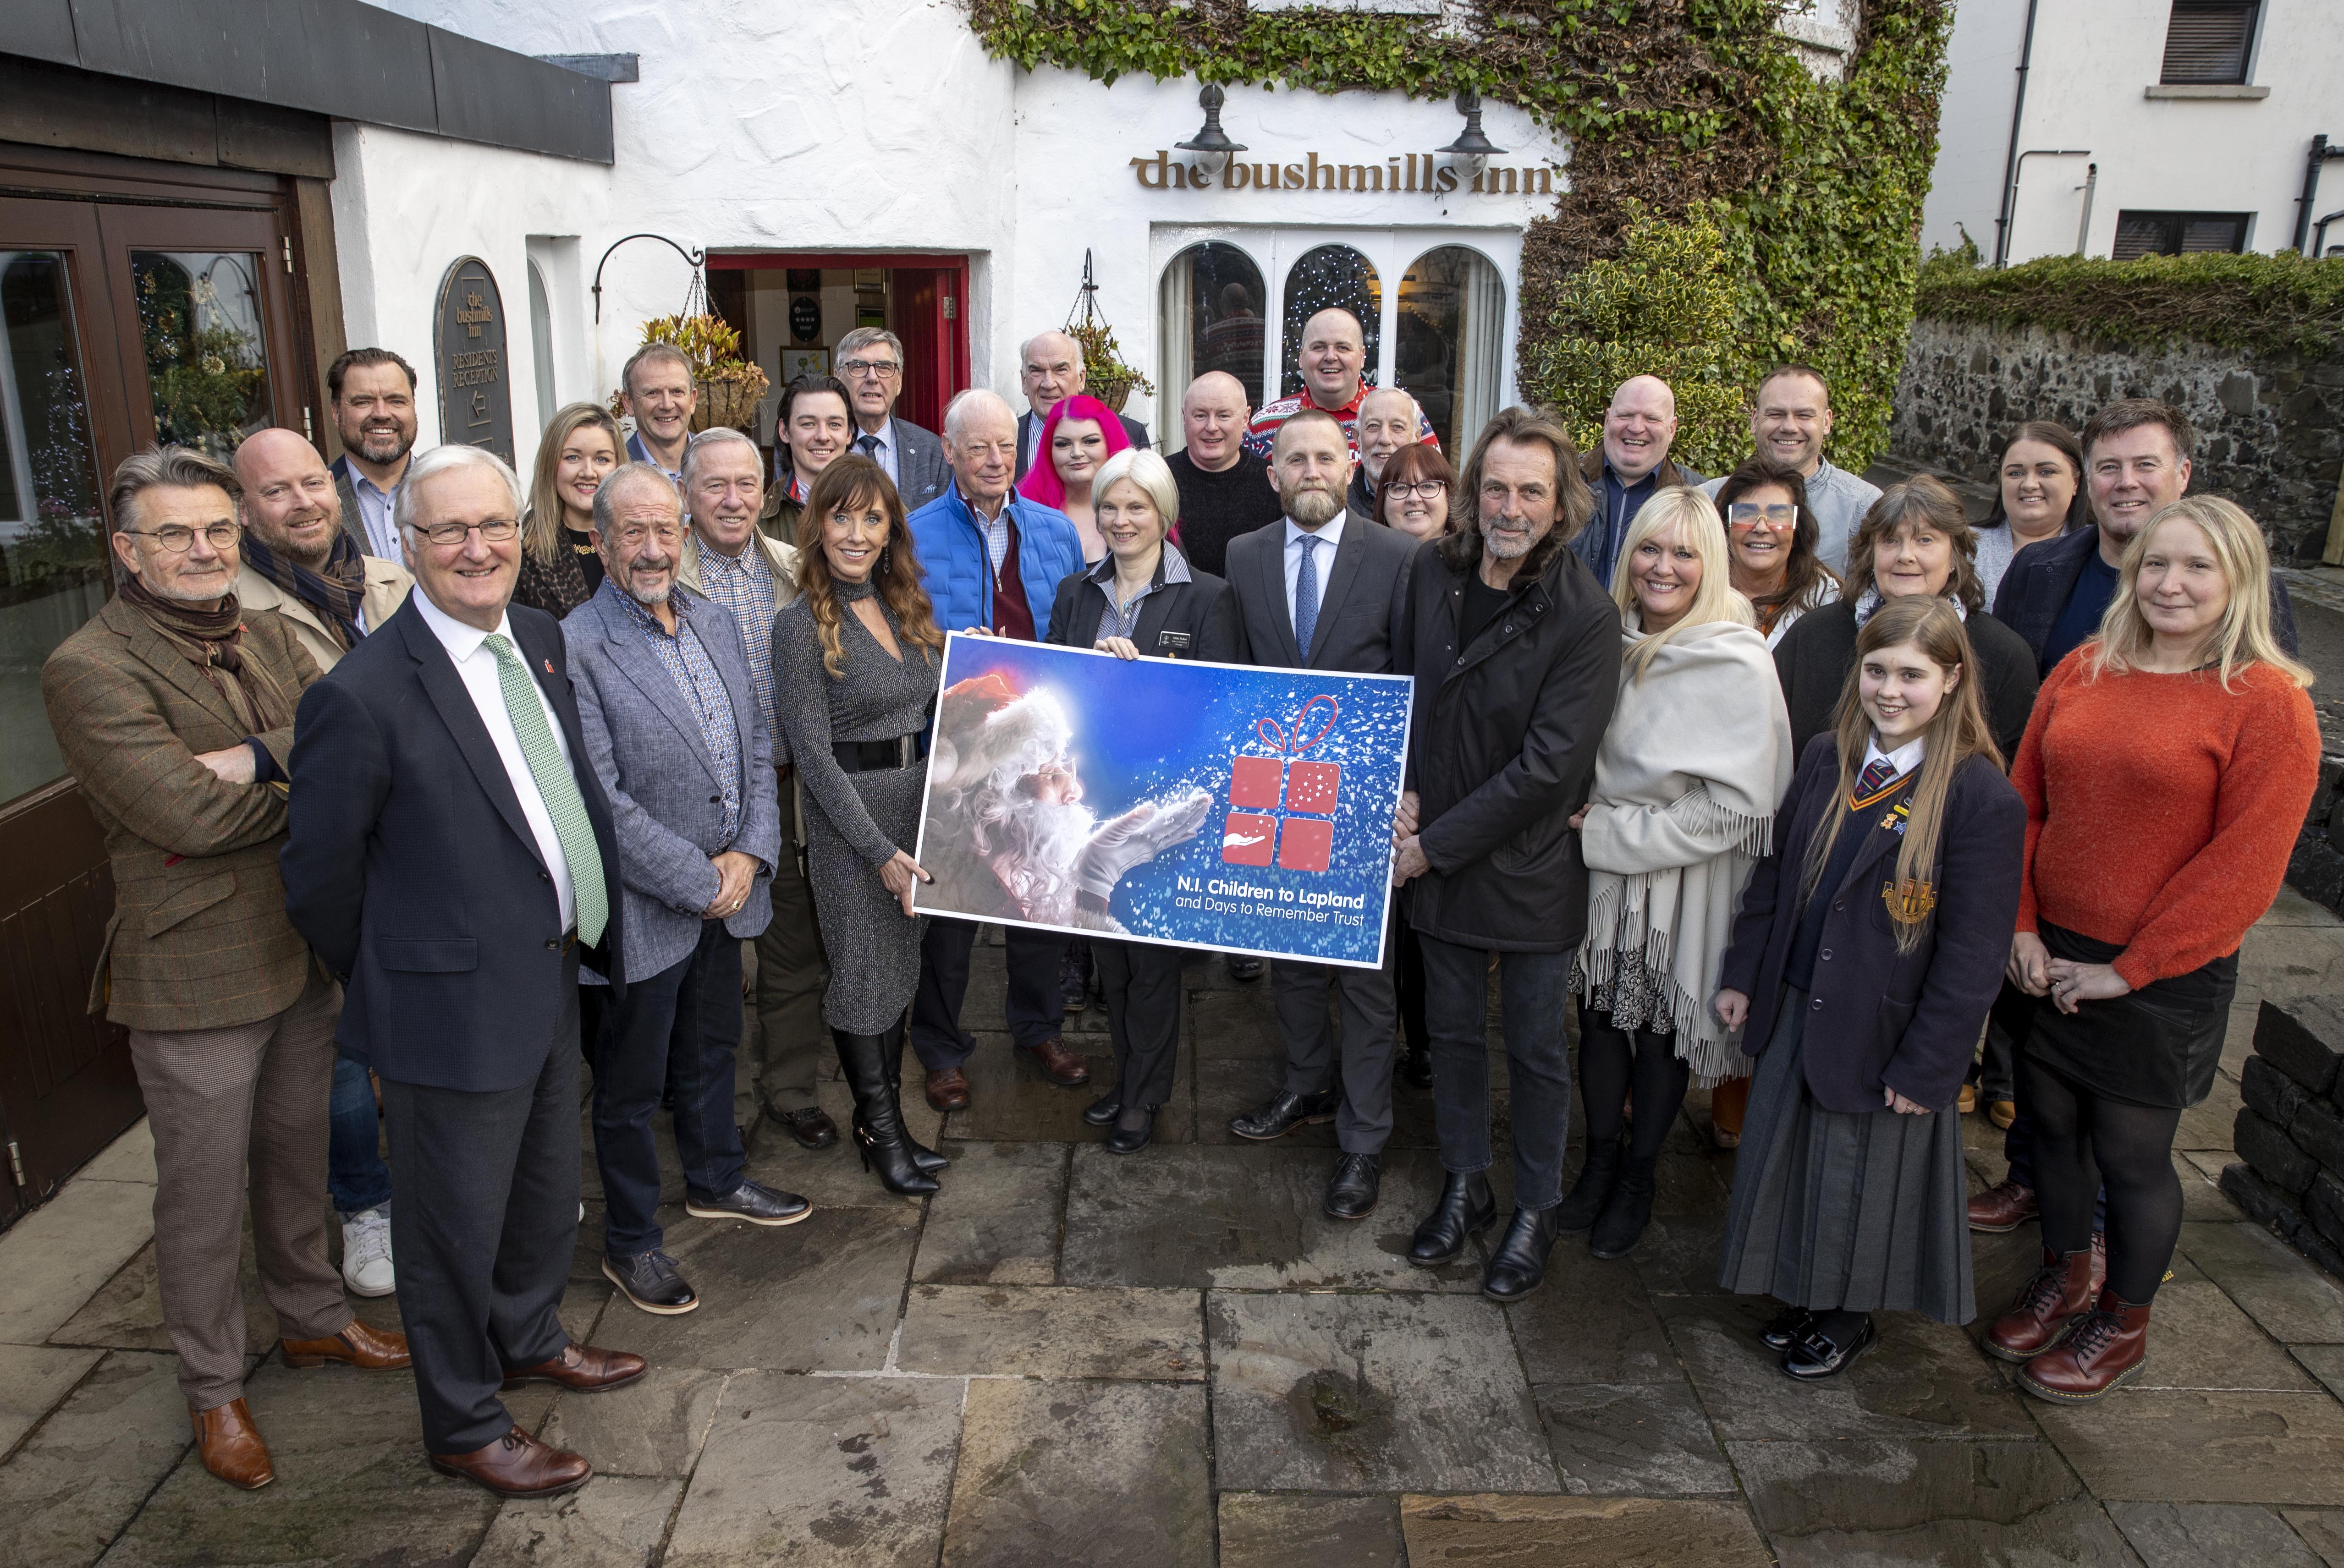 The Bushmills Inn raises £5,000 for NI charity, funding the cost of sending 5 deserving children to Lapland 